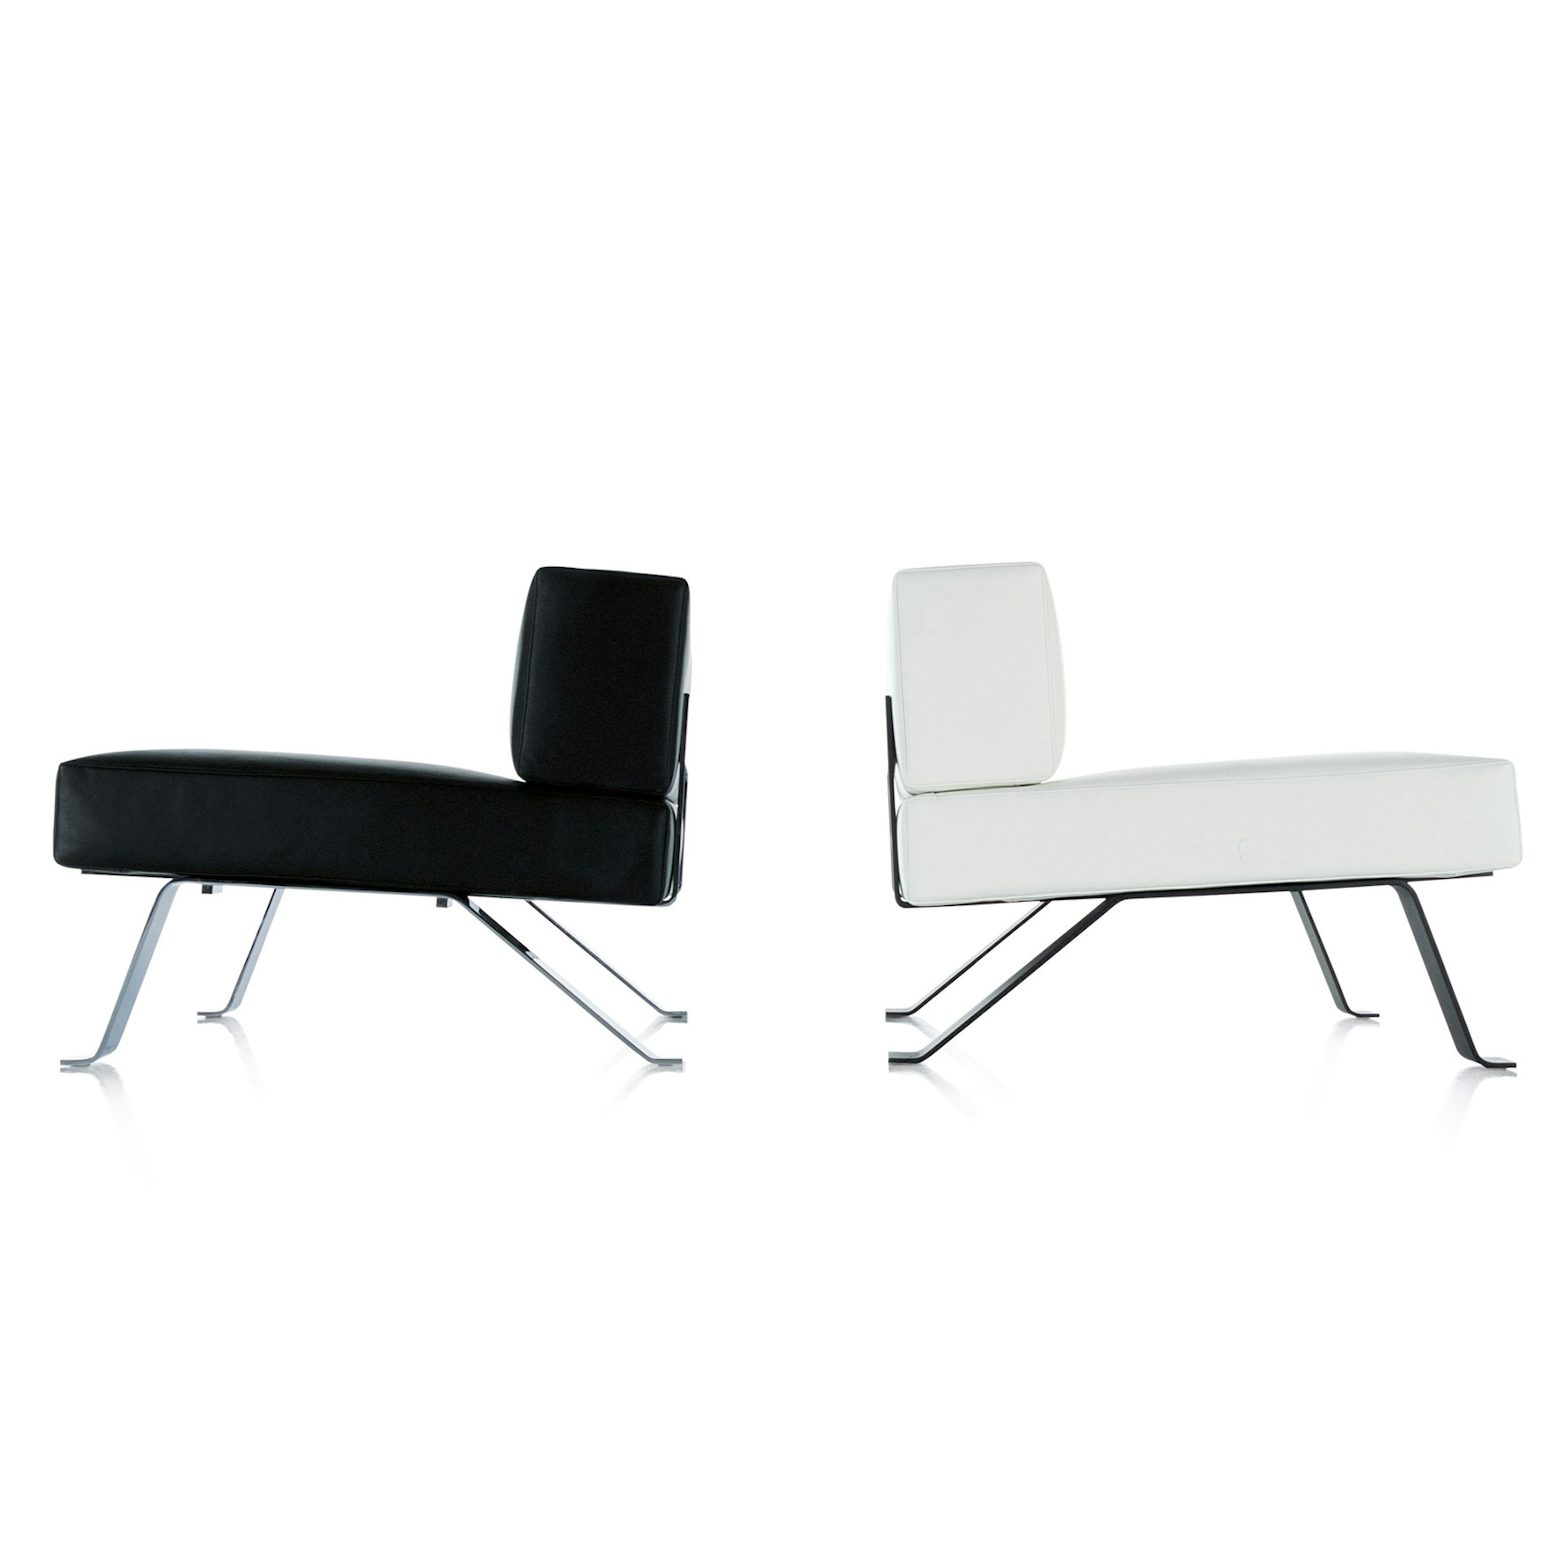 Ombra lounge chair Charlotte Perriand Cassina 1